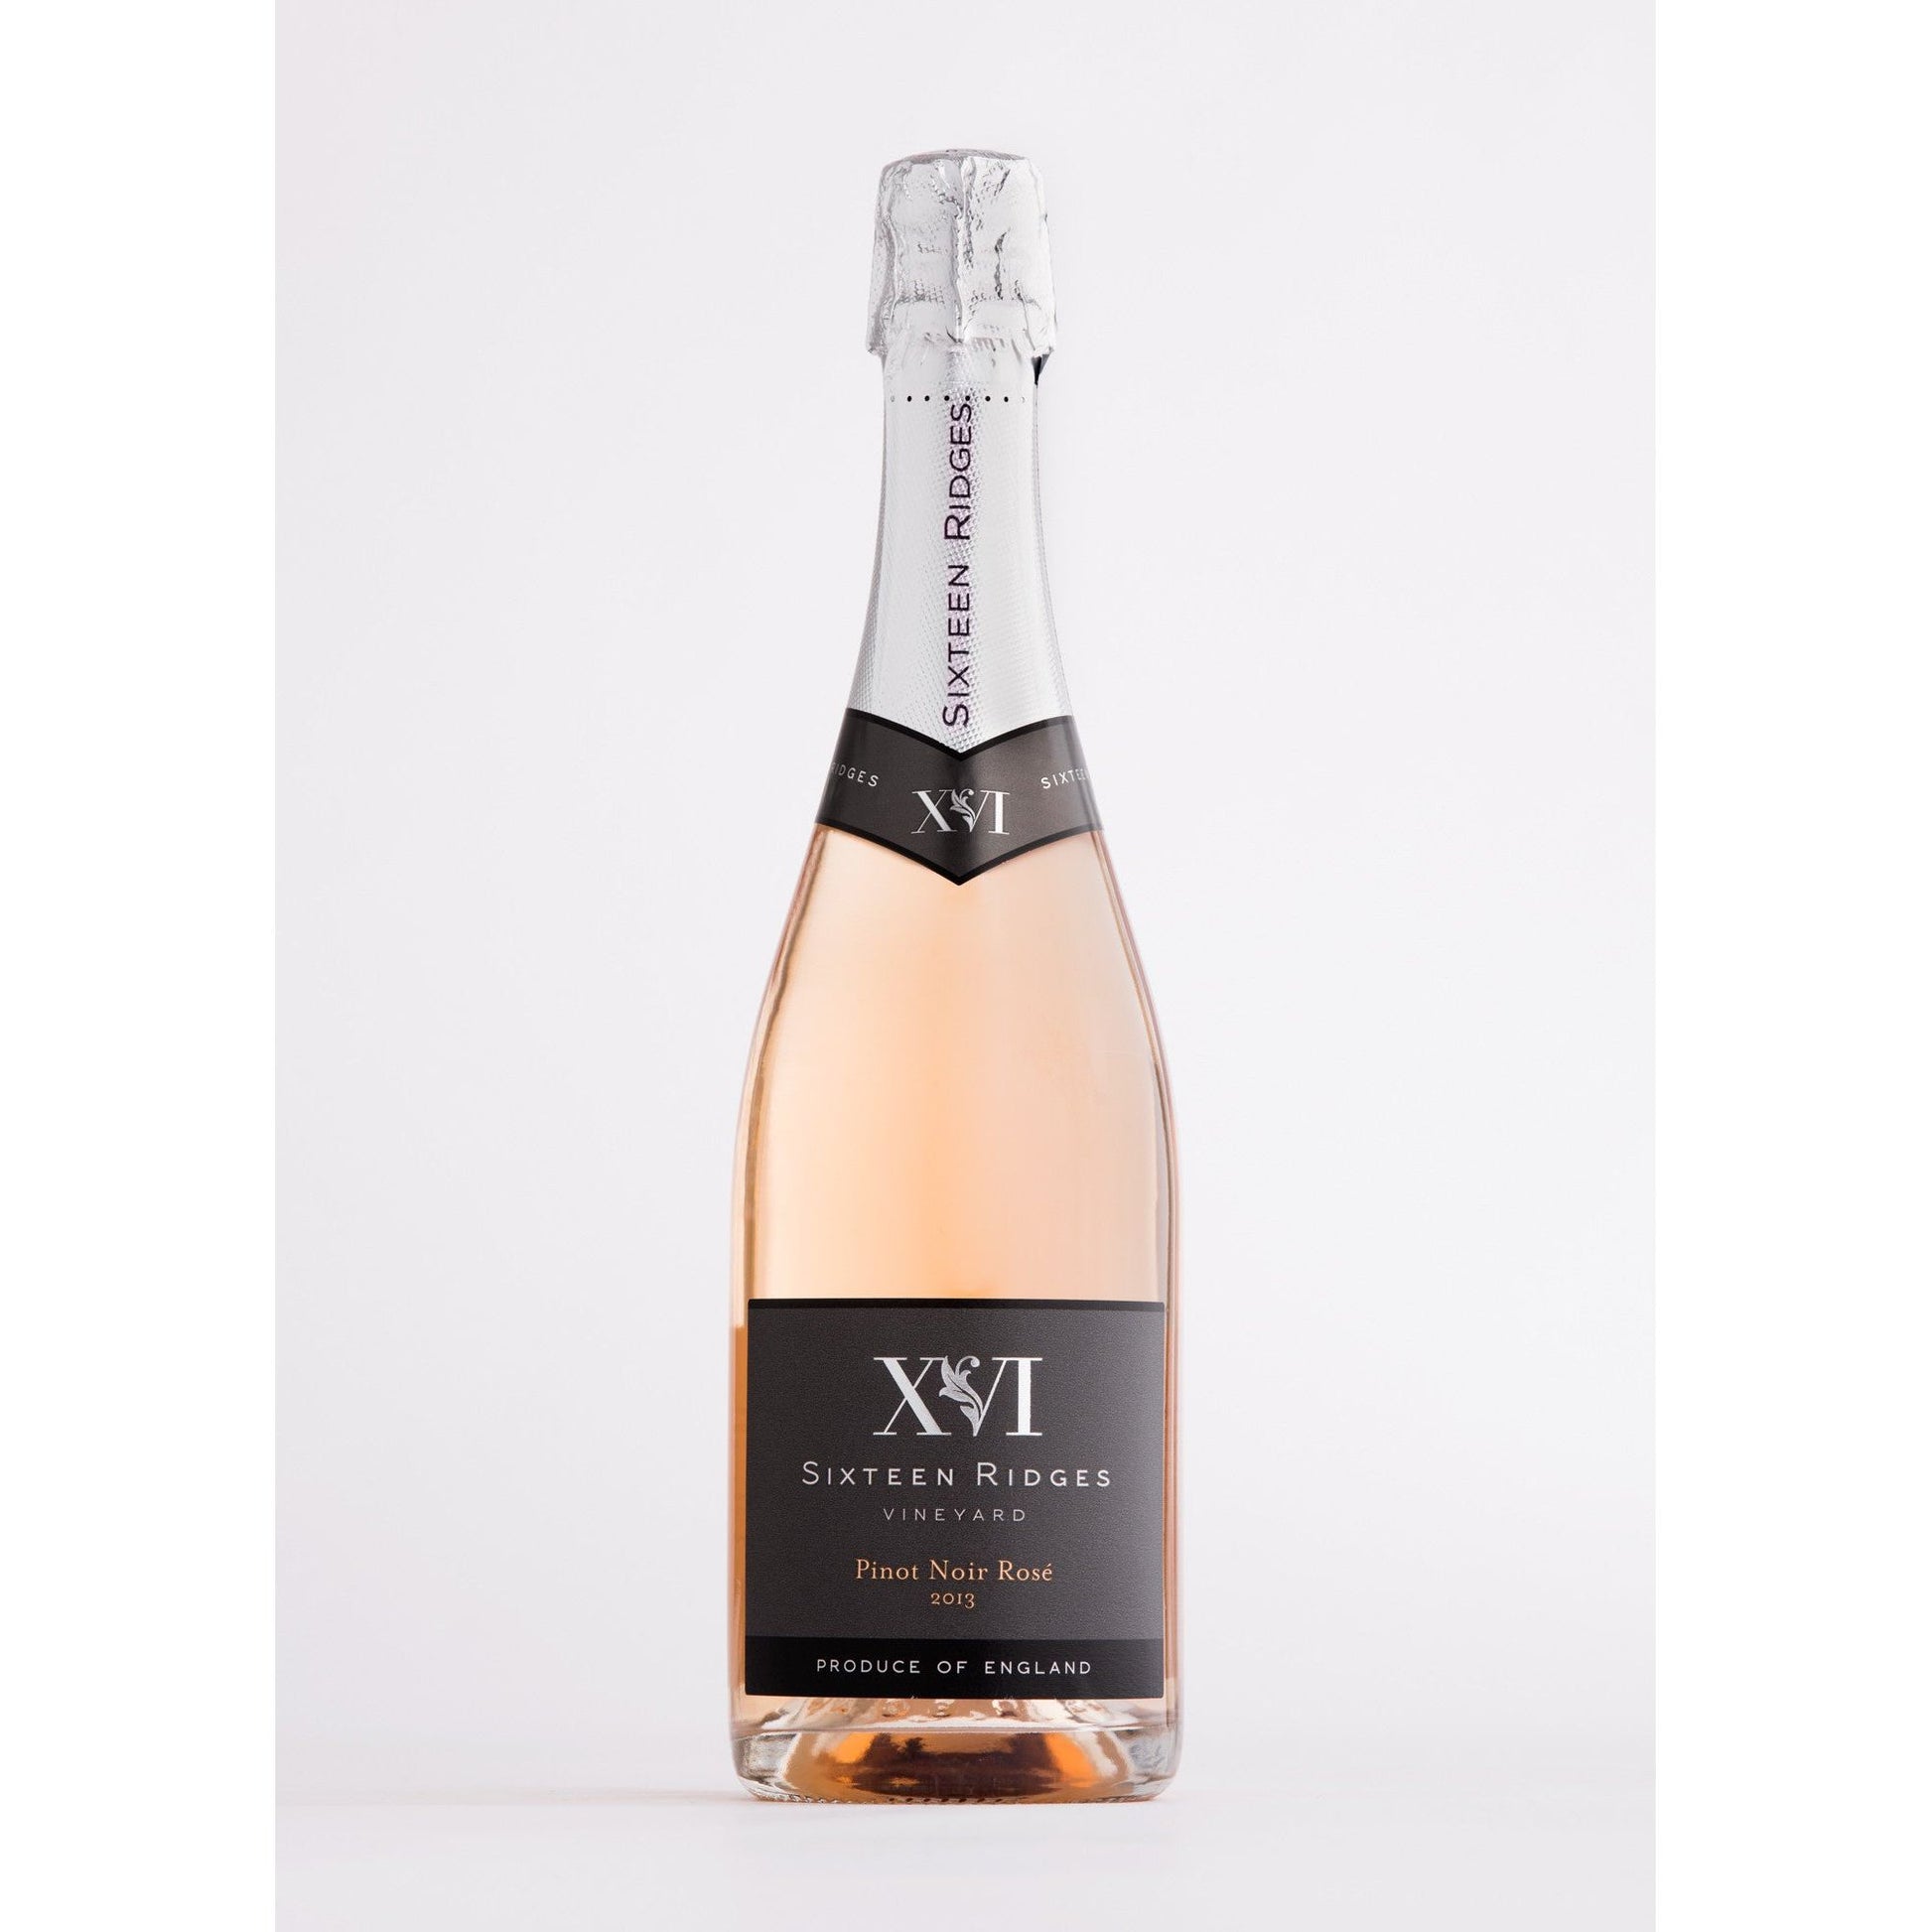 Sixteen Ridges Sparkling Rosé 2013 from the English Wine Collection